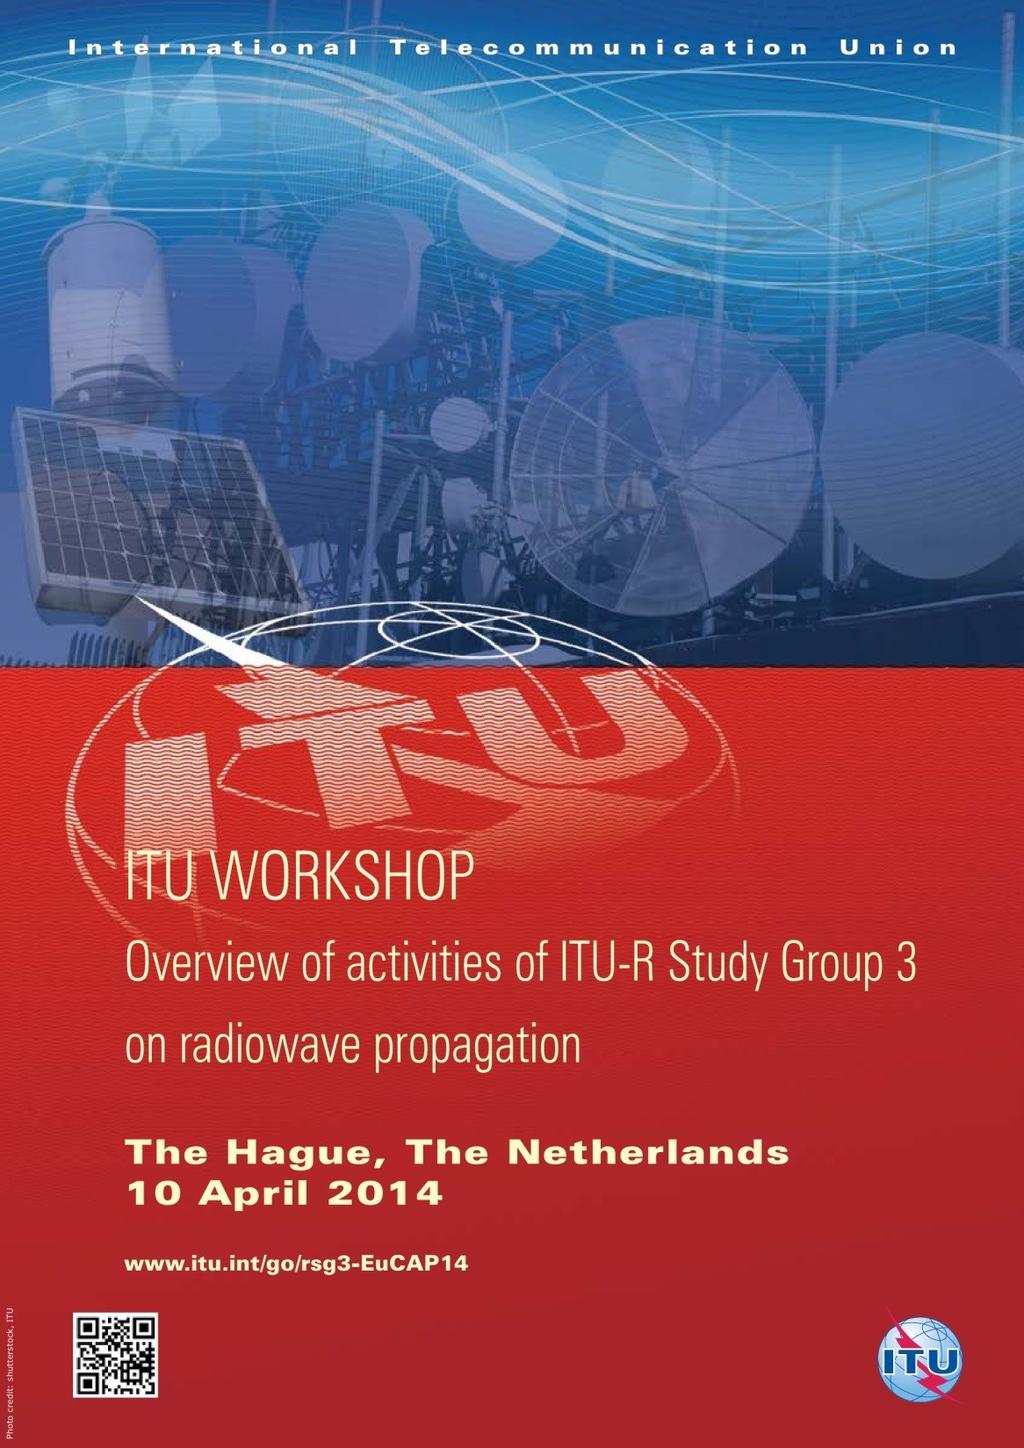 ITU WORKSHOP Overview of activities of ITU-R Study Group 3 on radiowave propagation: (The